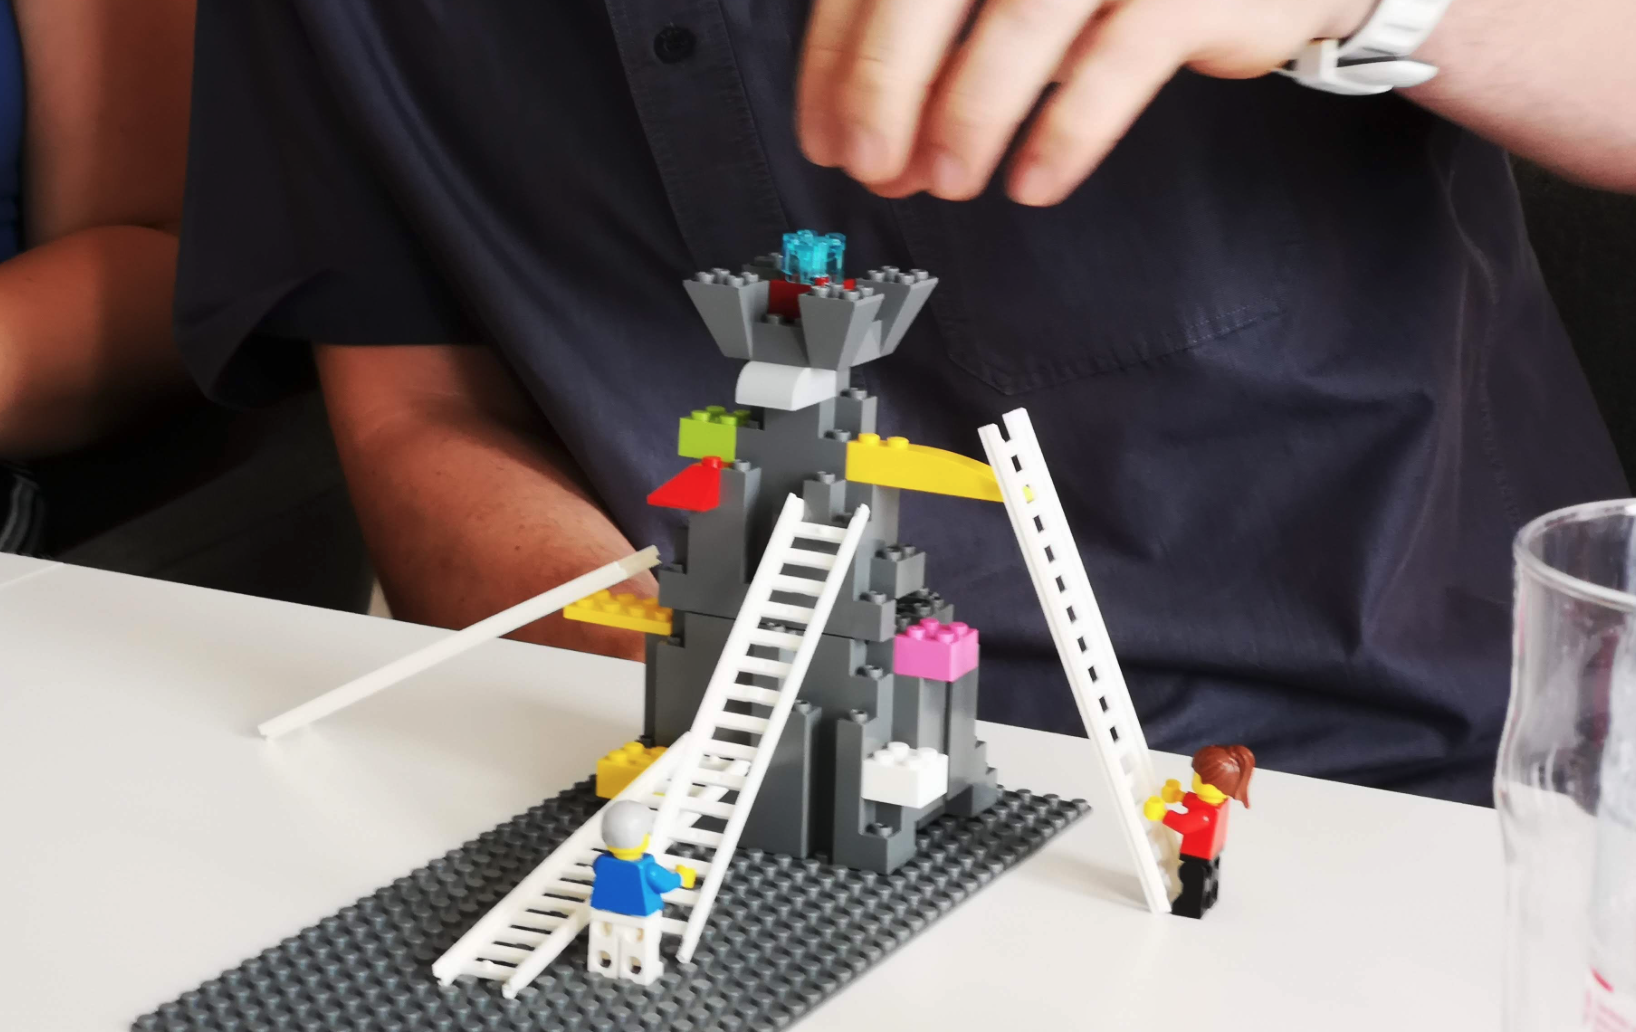 Playing for a visual identity – using Lego® Serious Play® in visual branding projects